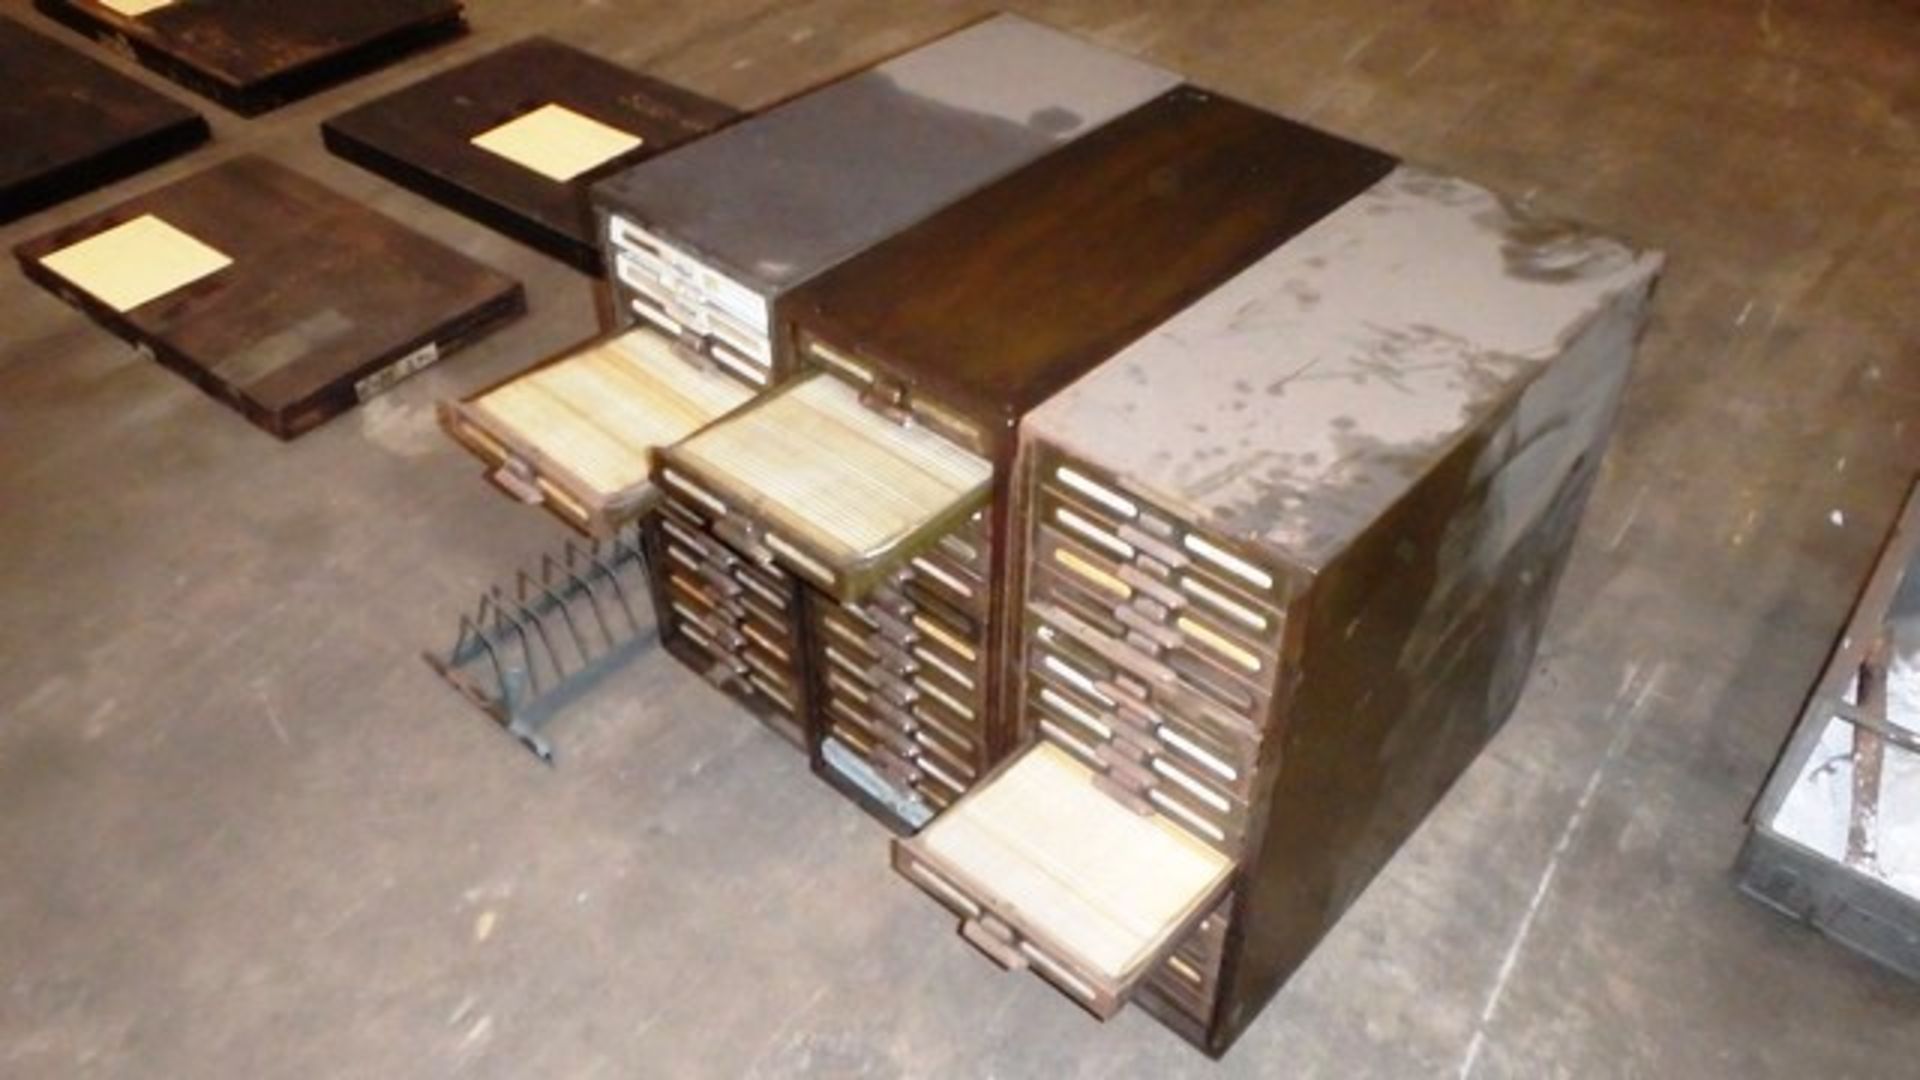 3 CARD FILING CABINETS AND RACK*LIQUIDATED STOCK* - Image 2 of 3